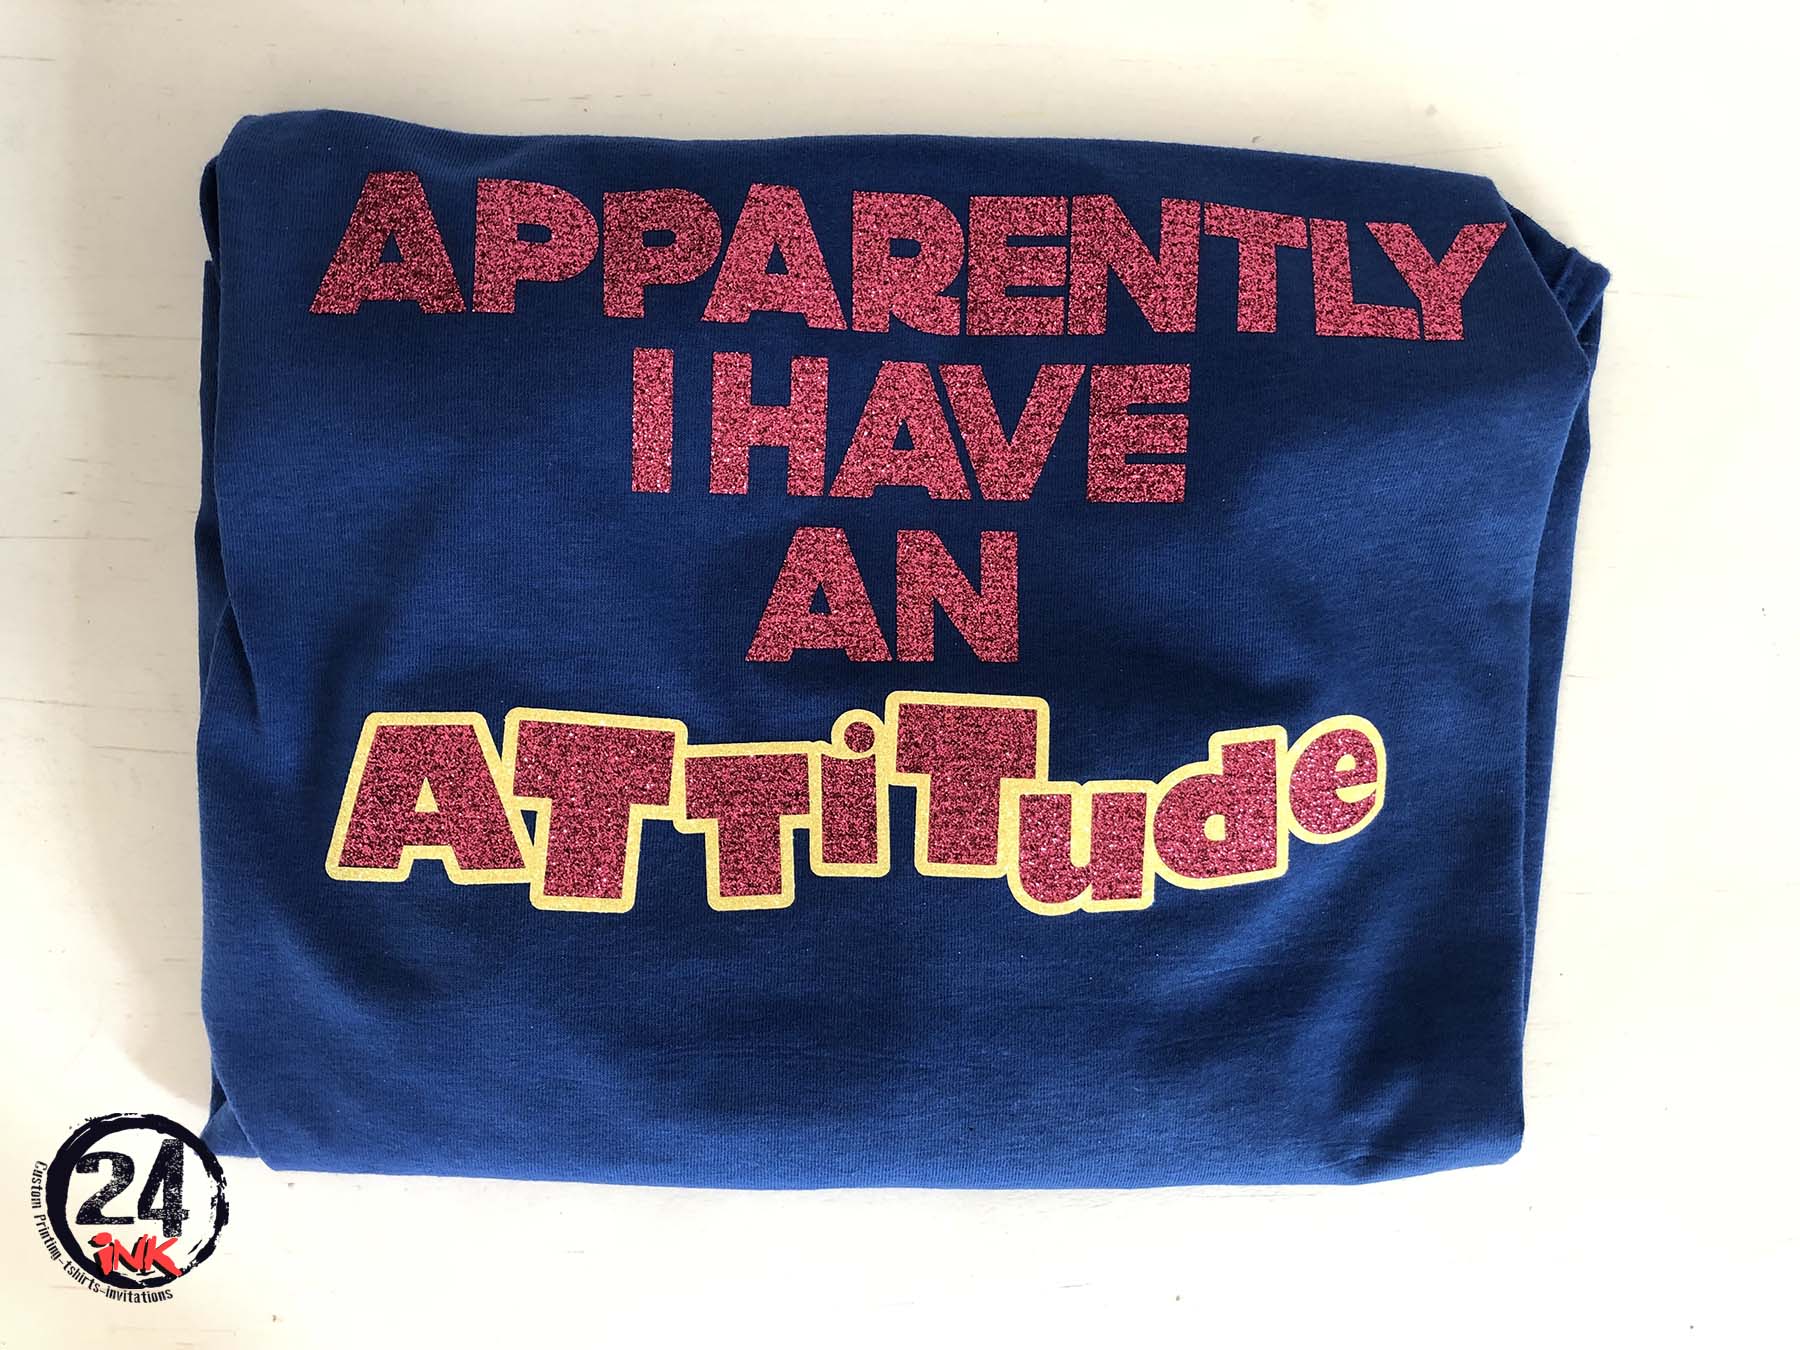 Apparently I have an Attitude Shirt